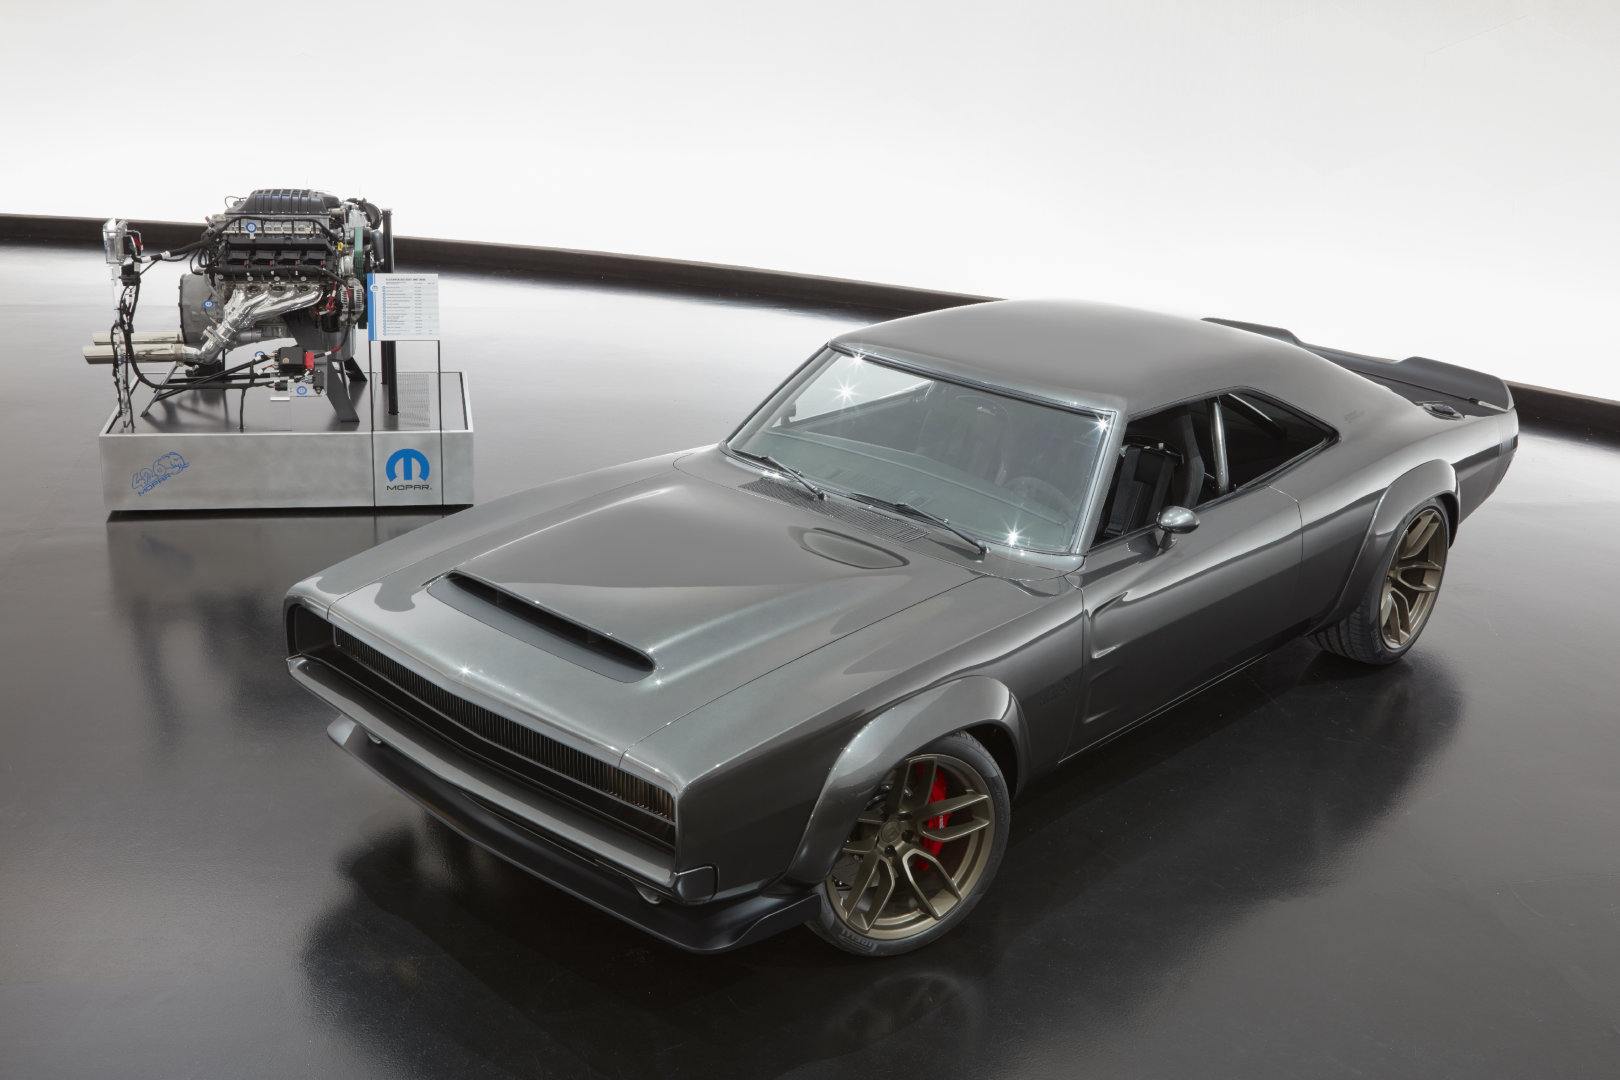 The 1968 Dodge “Super Charger” Charger Concept Incorporates